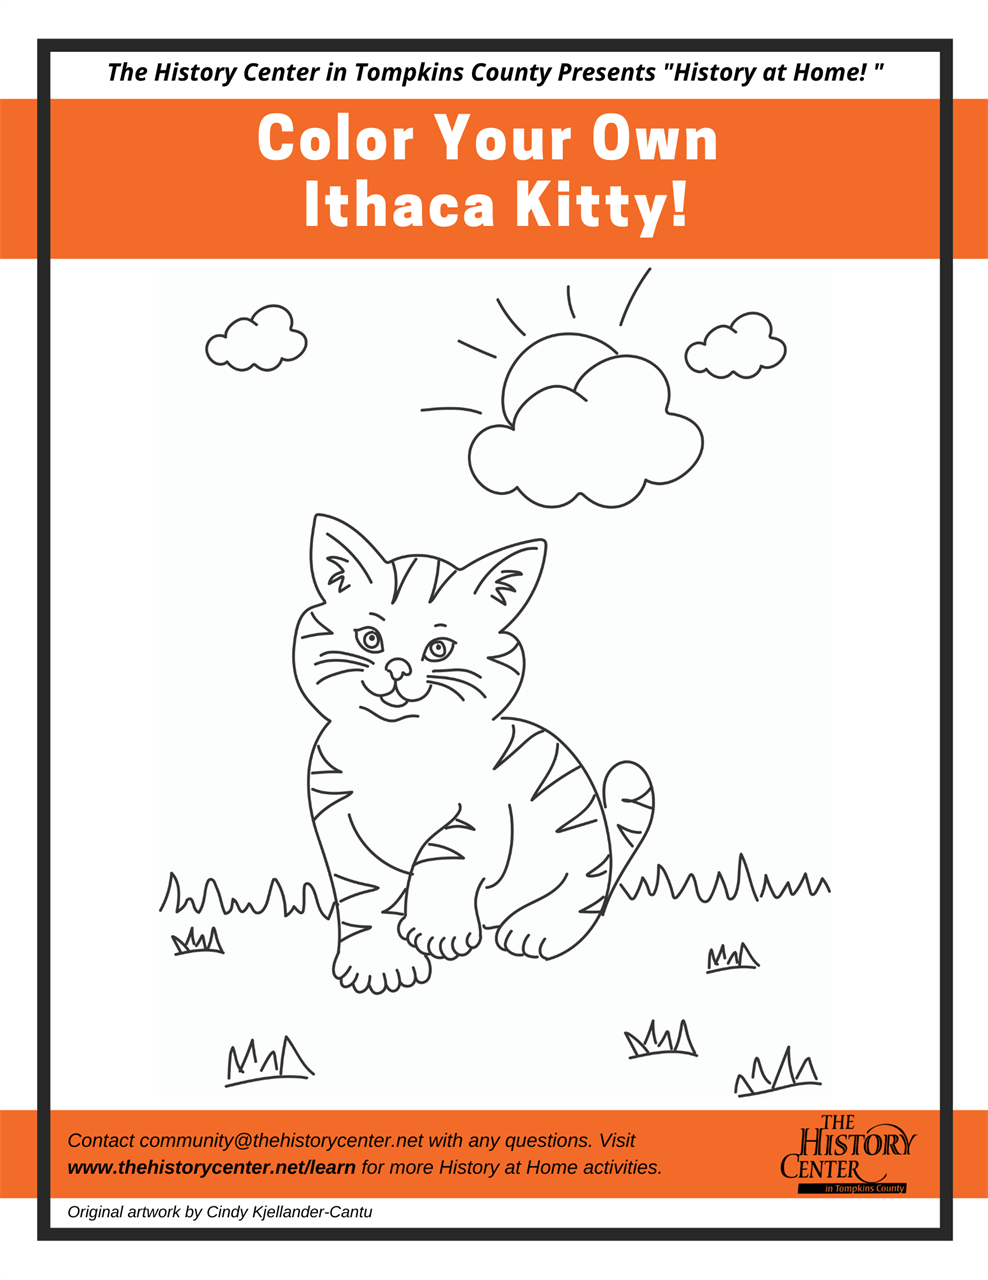 "Color Your Own Ithaca Kitty!"